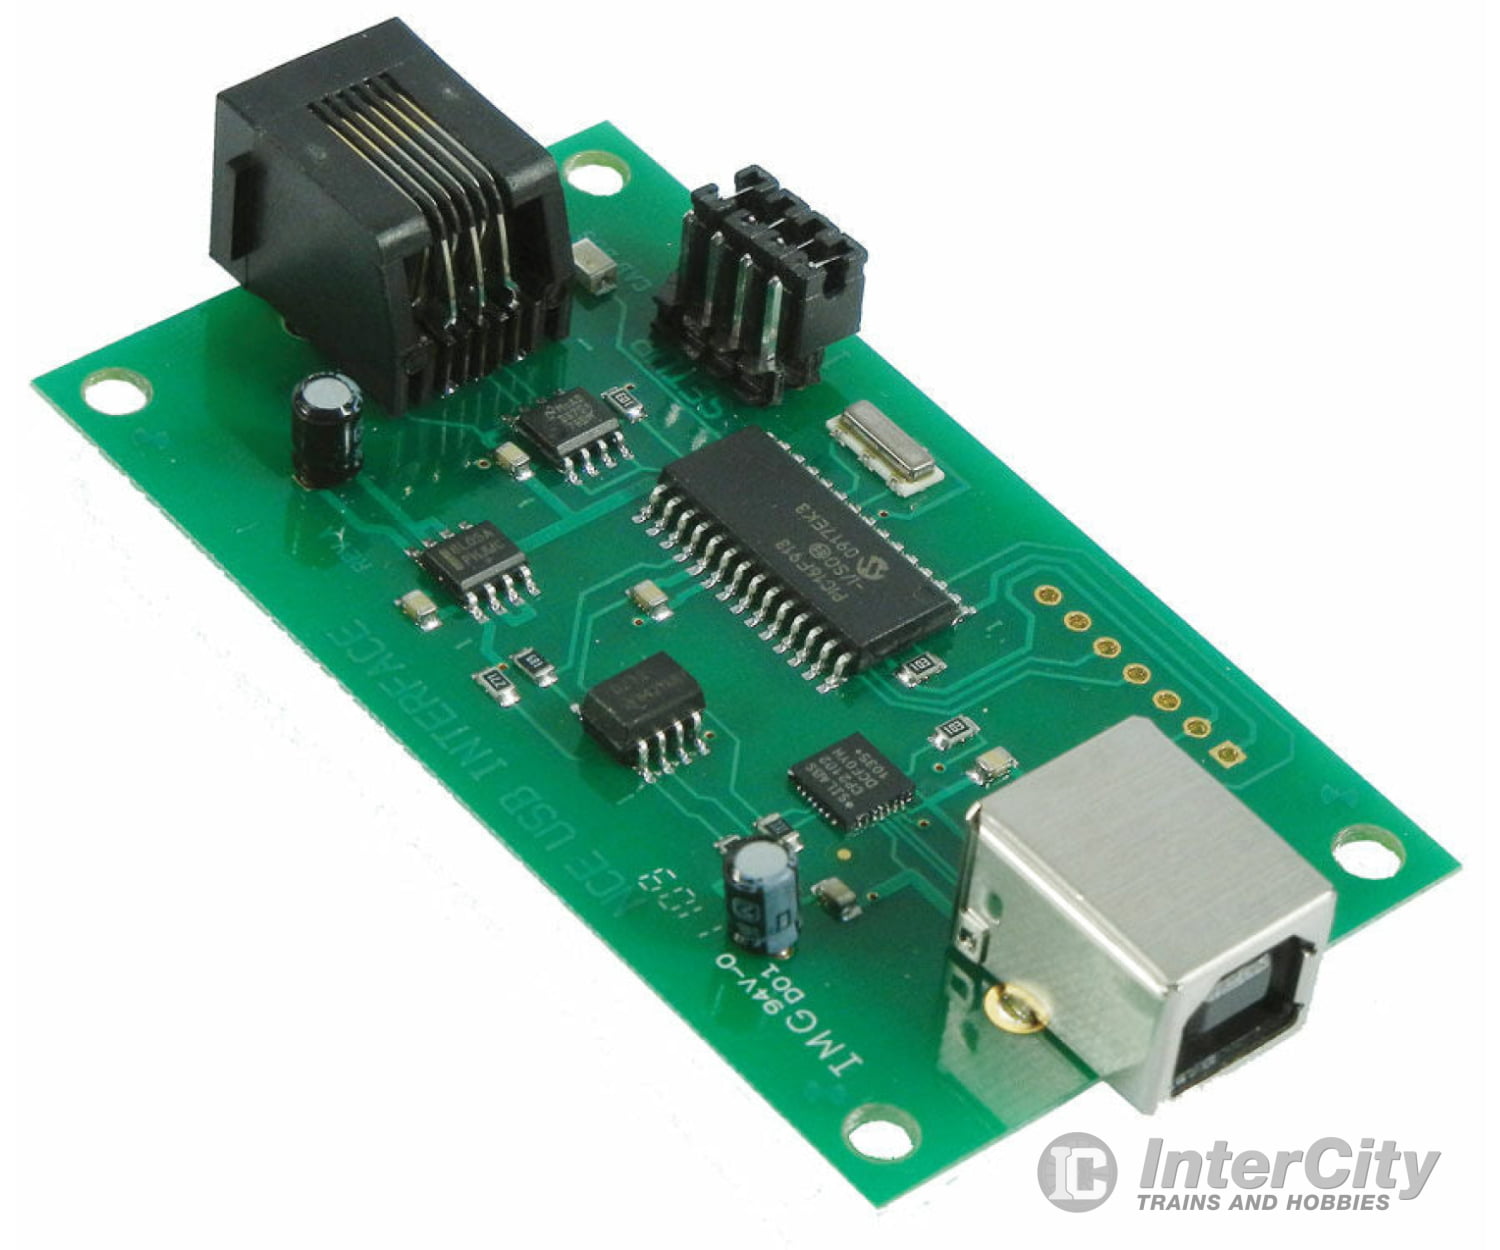 Nce 223 Usb Interface -- Computer Power Cab To Usb Command Stations Expansion